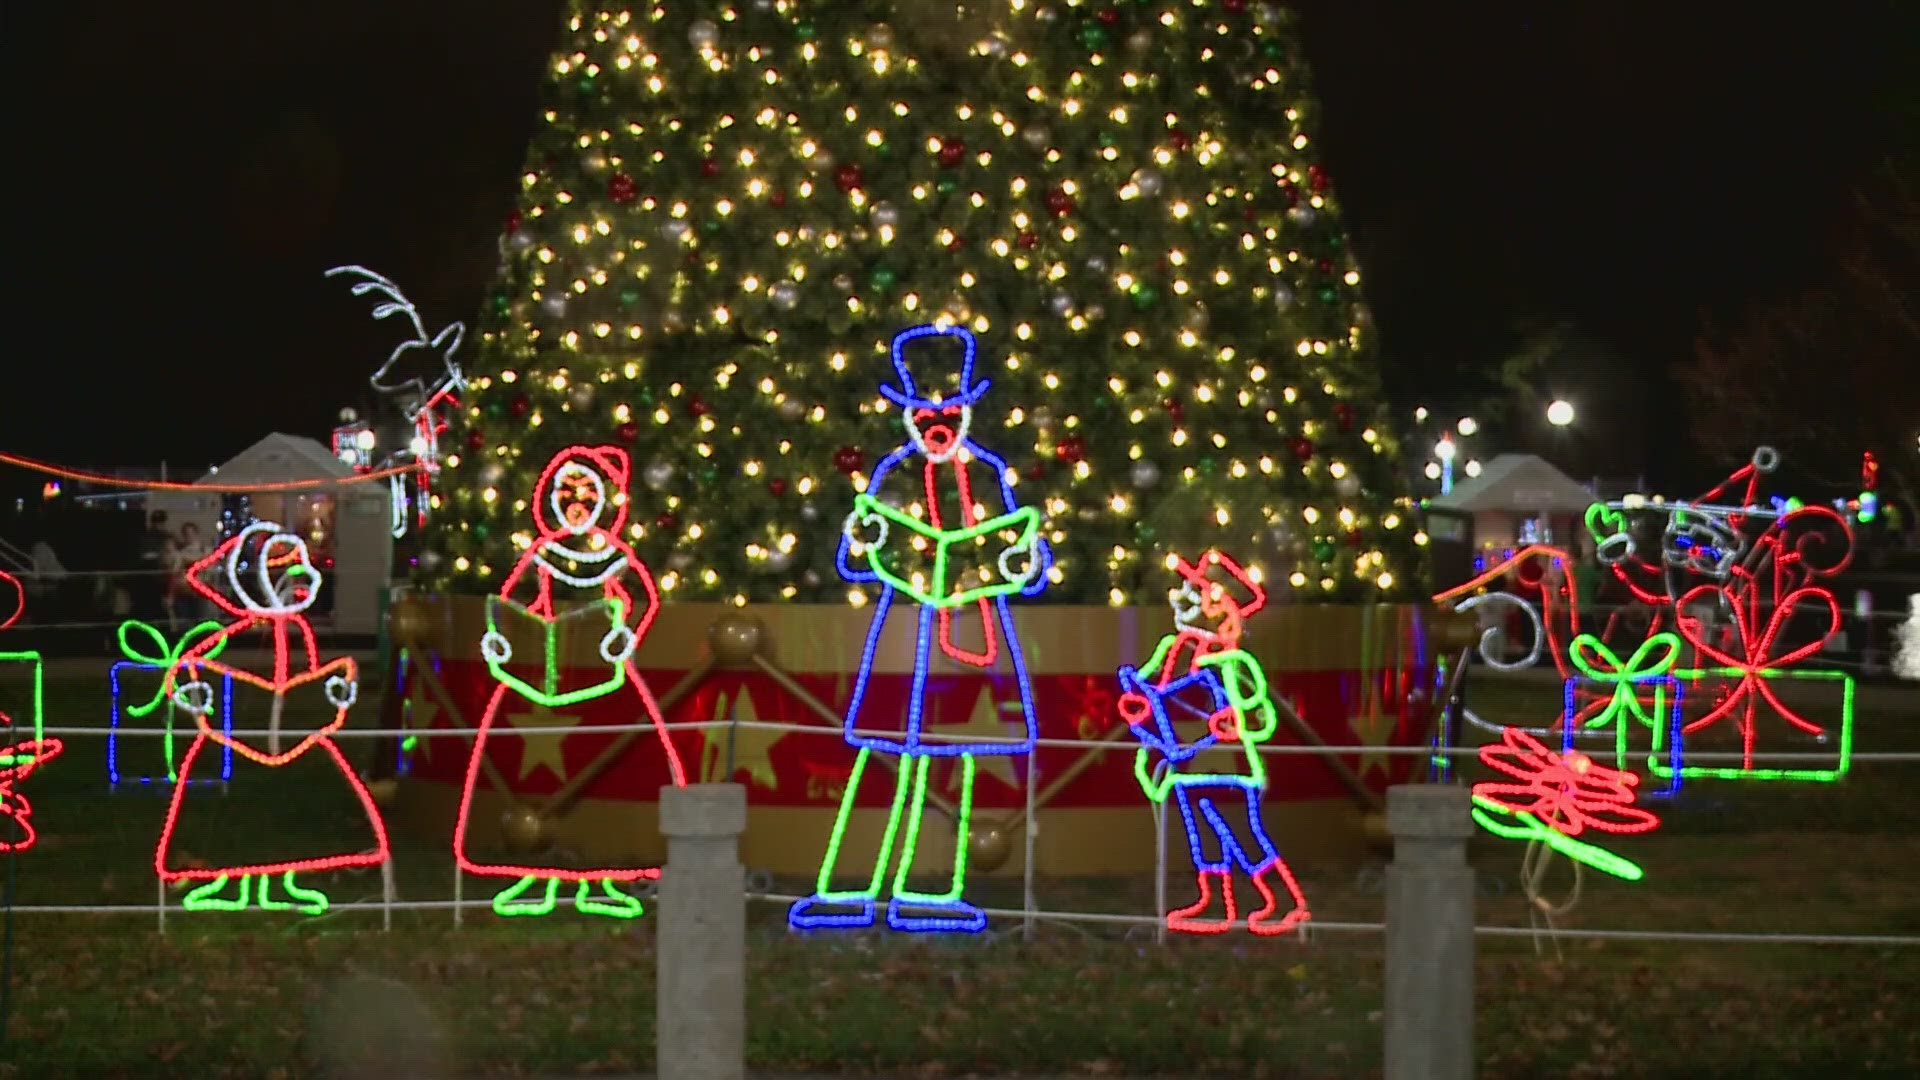 If you missed it, lights at Heritage Park and the Lights at Lafreniere park will be open through December 31st.